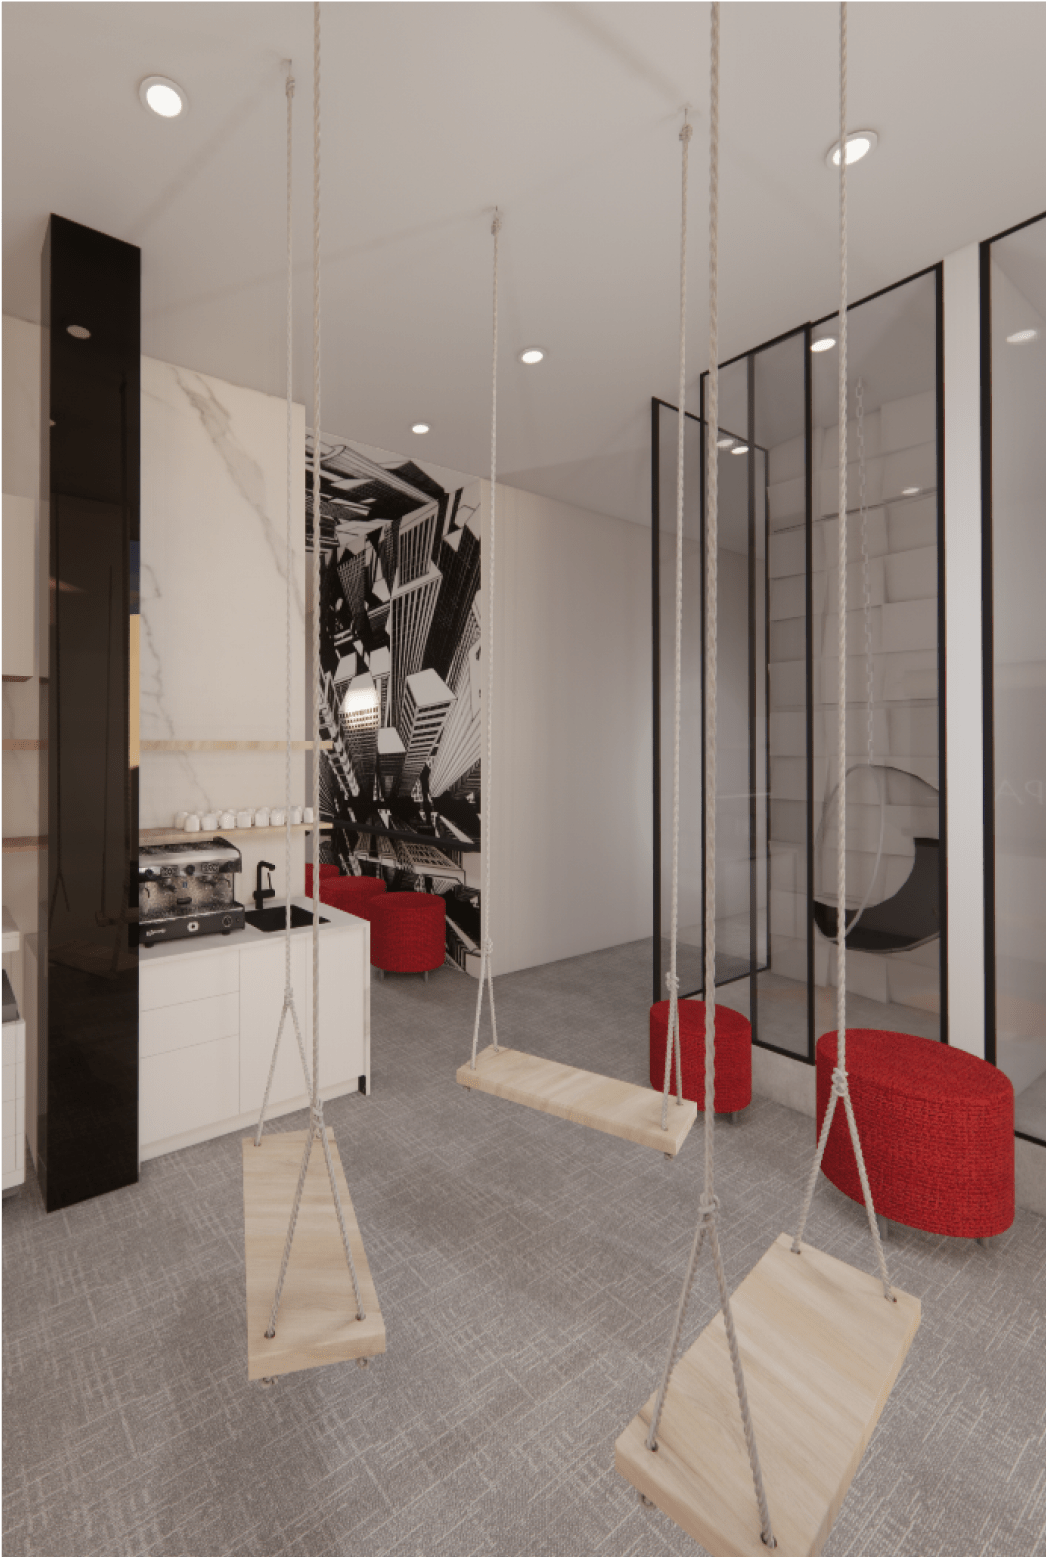 Projet Remax | Reeves + Richard Designers